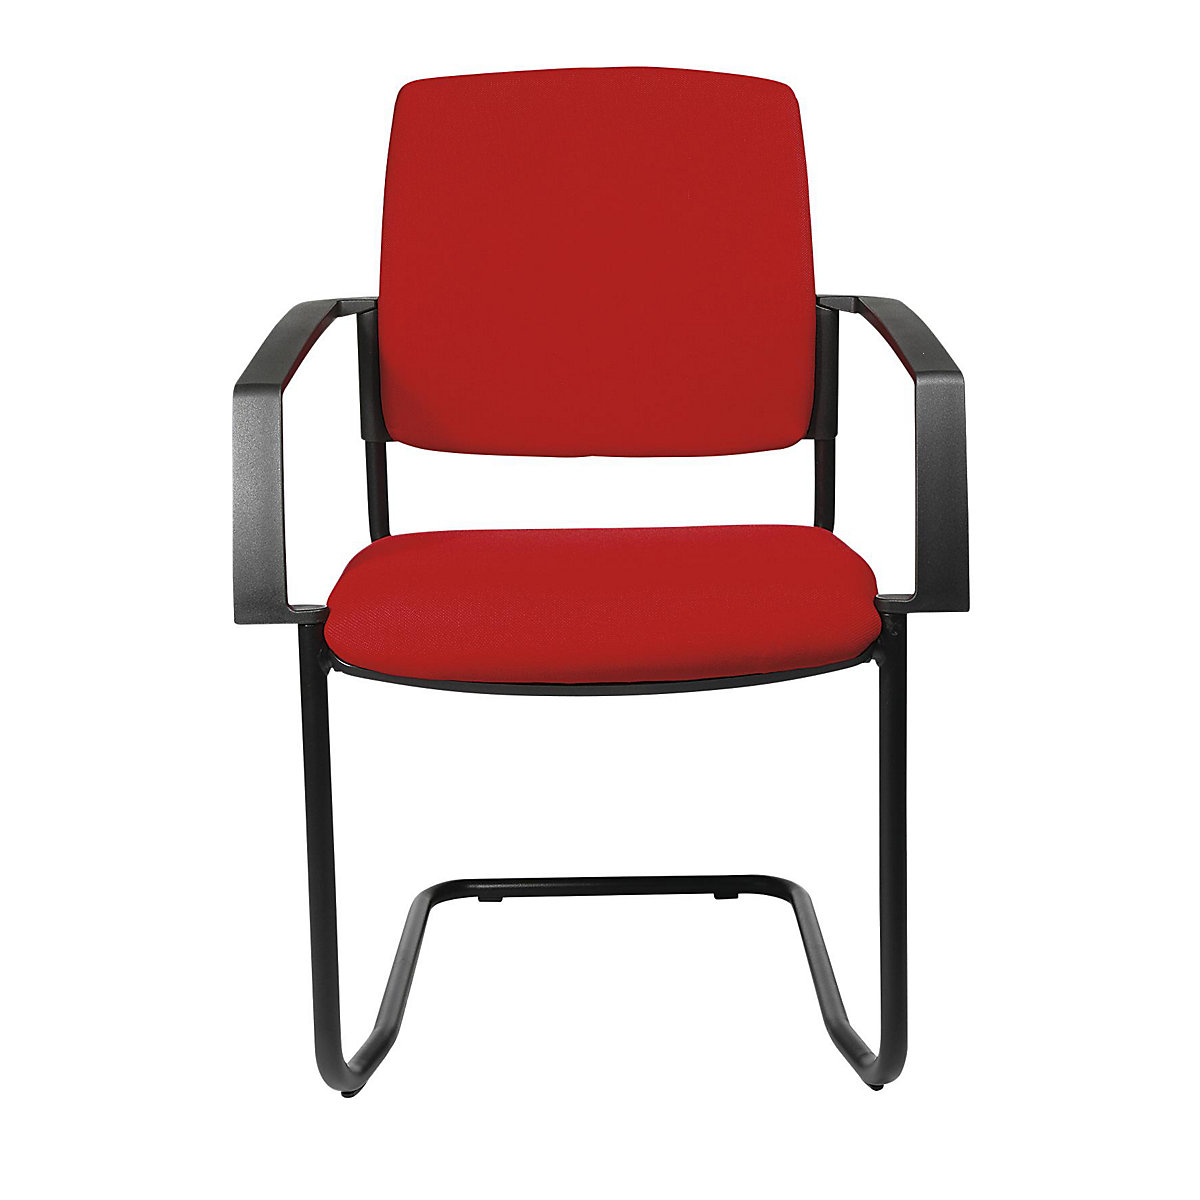 Padded stacking chair – Topstar, cantilever chair, pack of 2, black frame, red upholstery-6